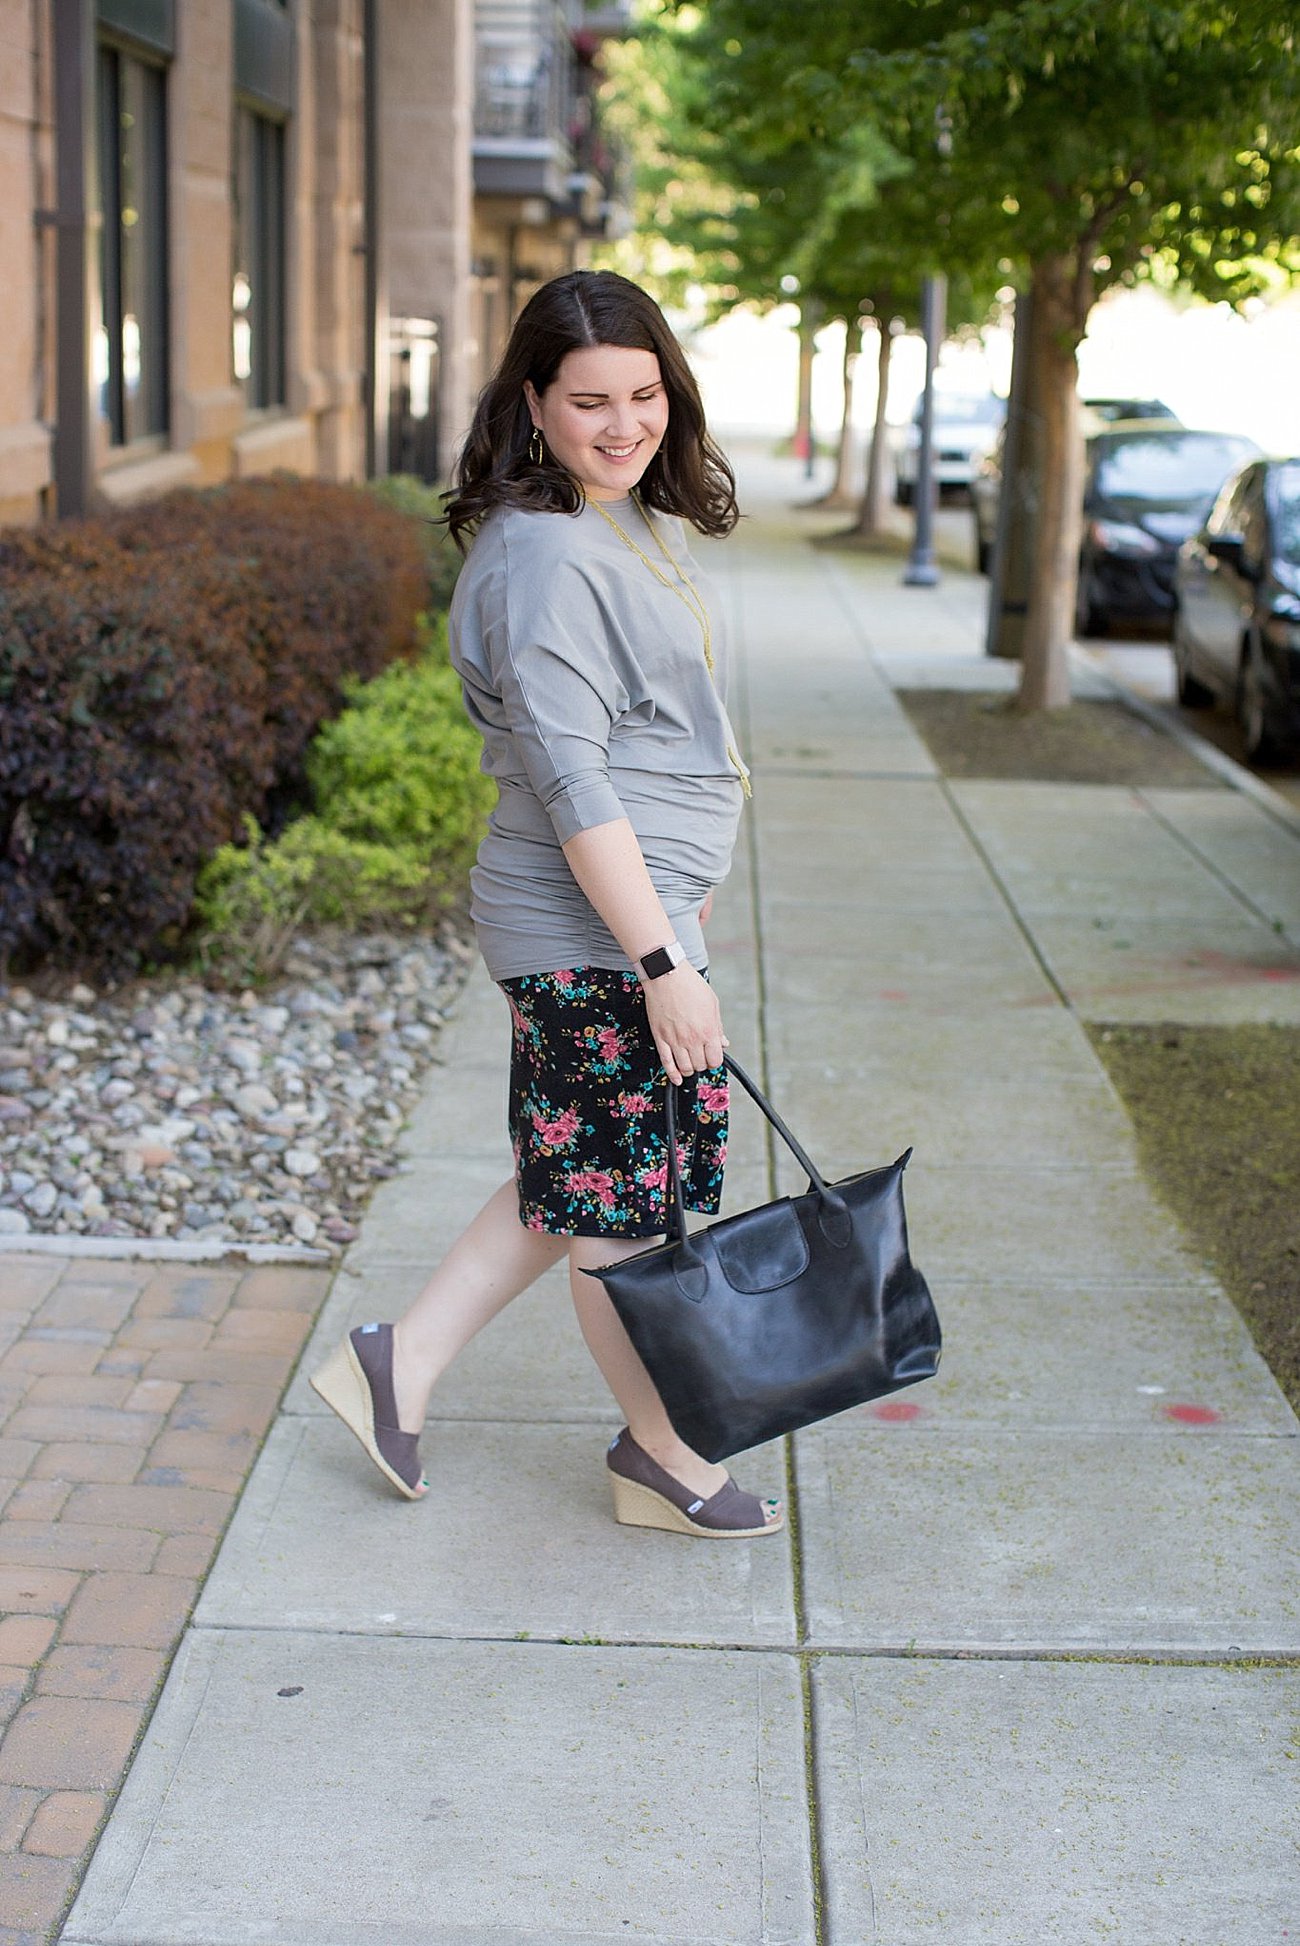 Elegantees "Cassie" ruched dolman sleeve tunic, Agnes & Dora floral pencil skirt, TOMS wedges, ethical fashion blogger (4)